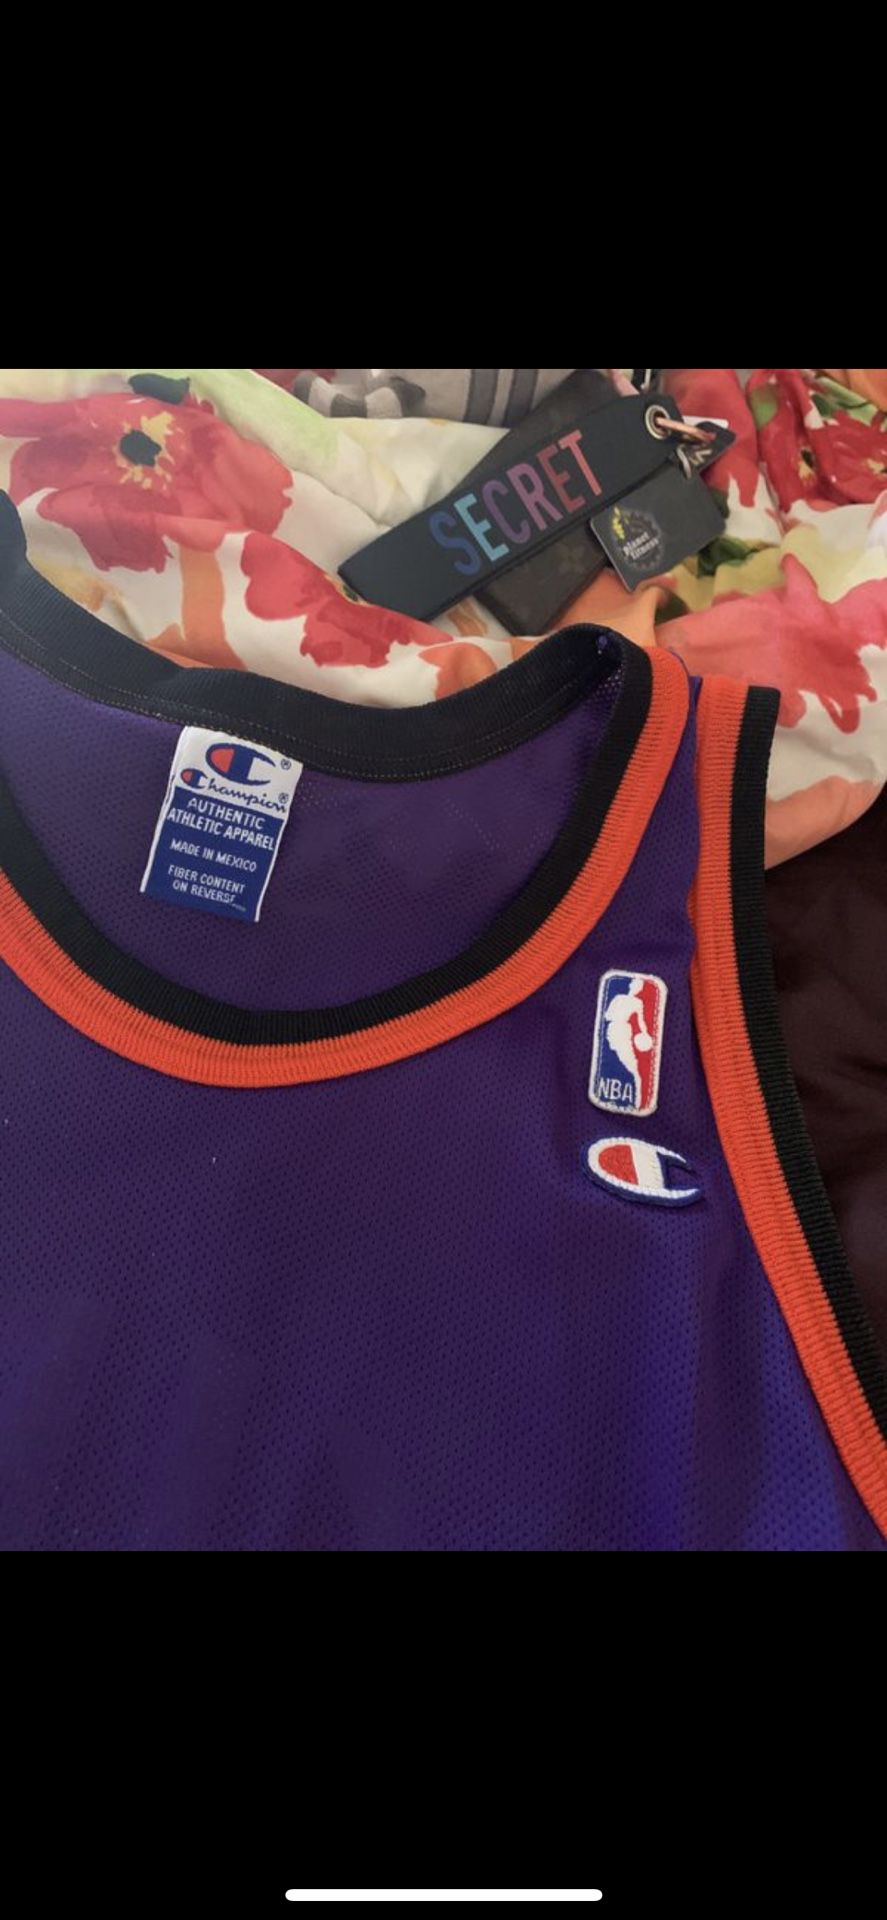 Louis Vuitton Jason kidd jersey for Sale in Tacoma, WA - OfferUp